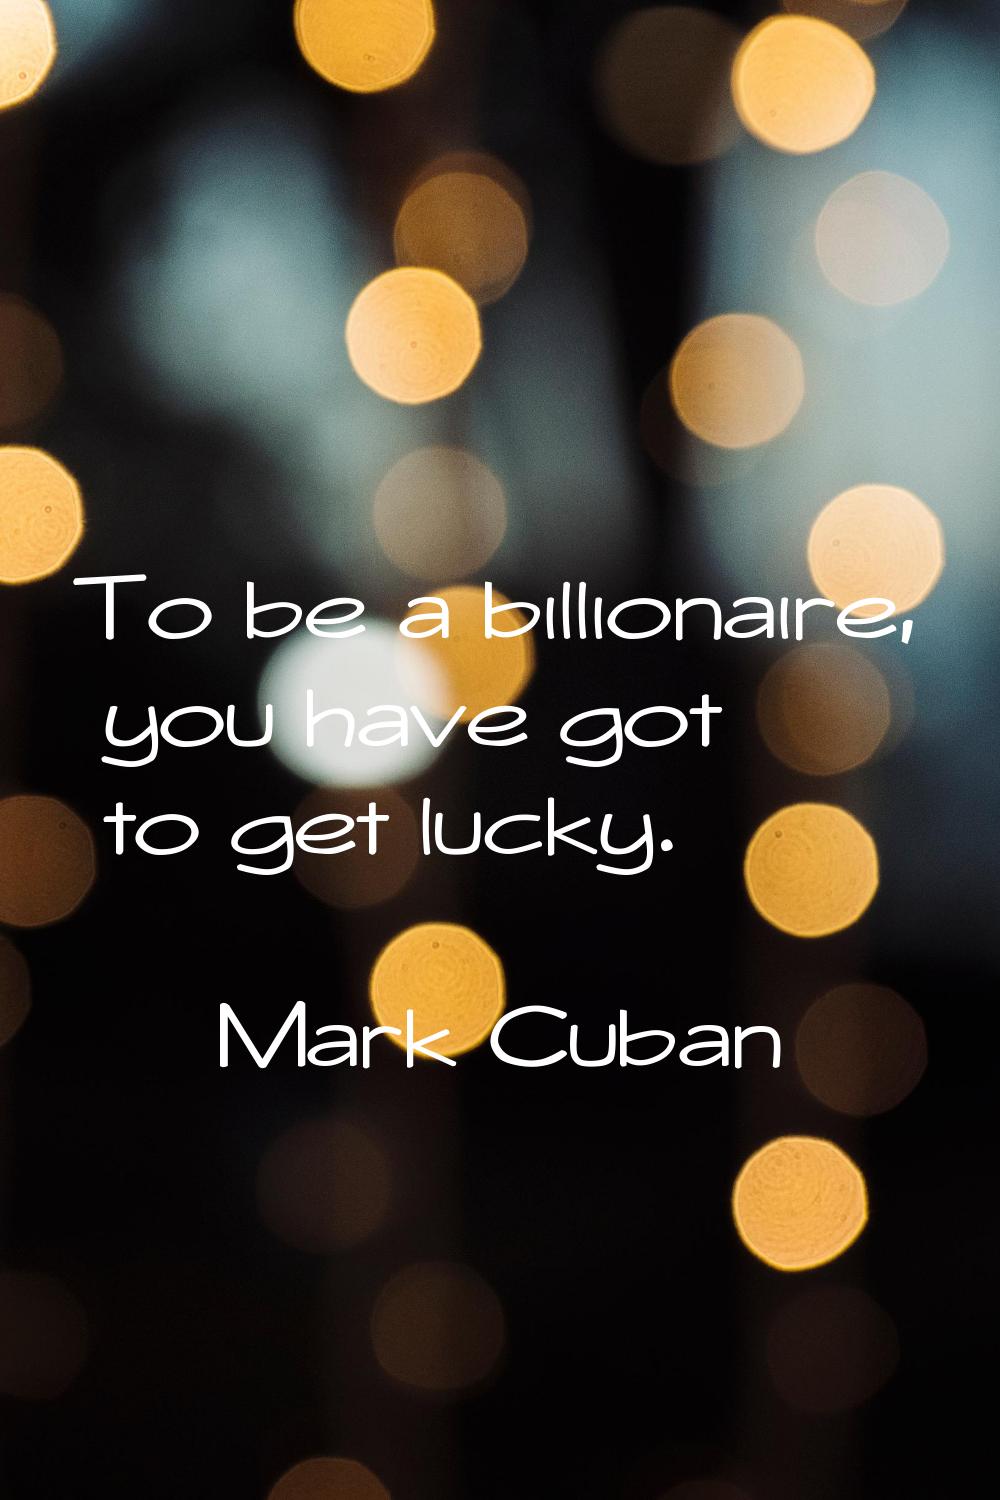 To be a billionaire, you have got to get lucky.